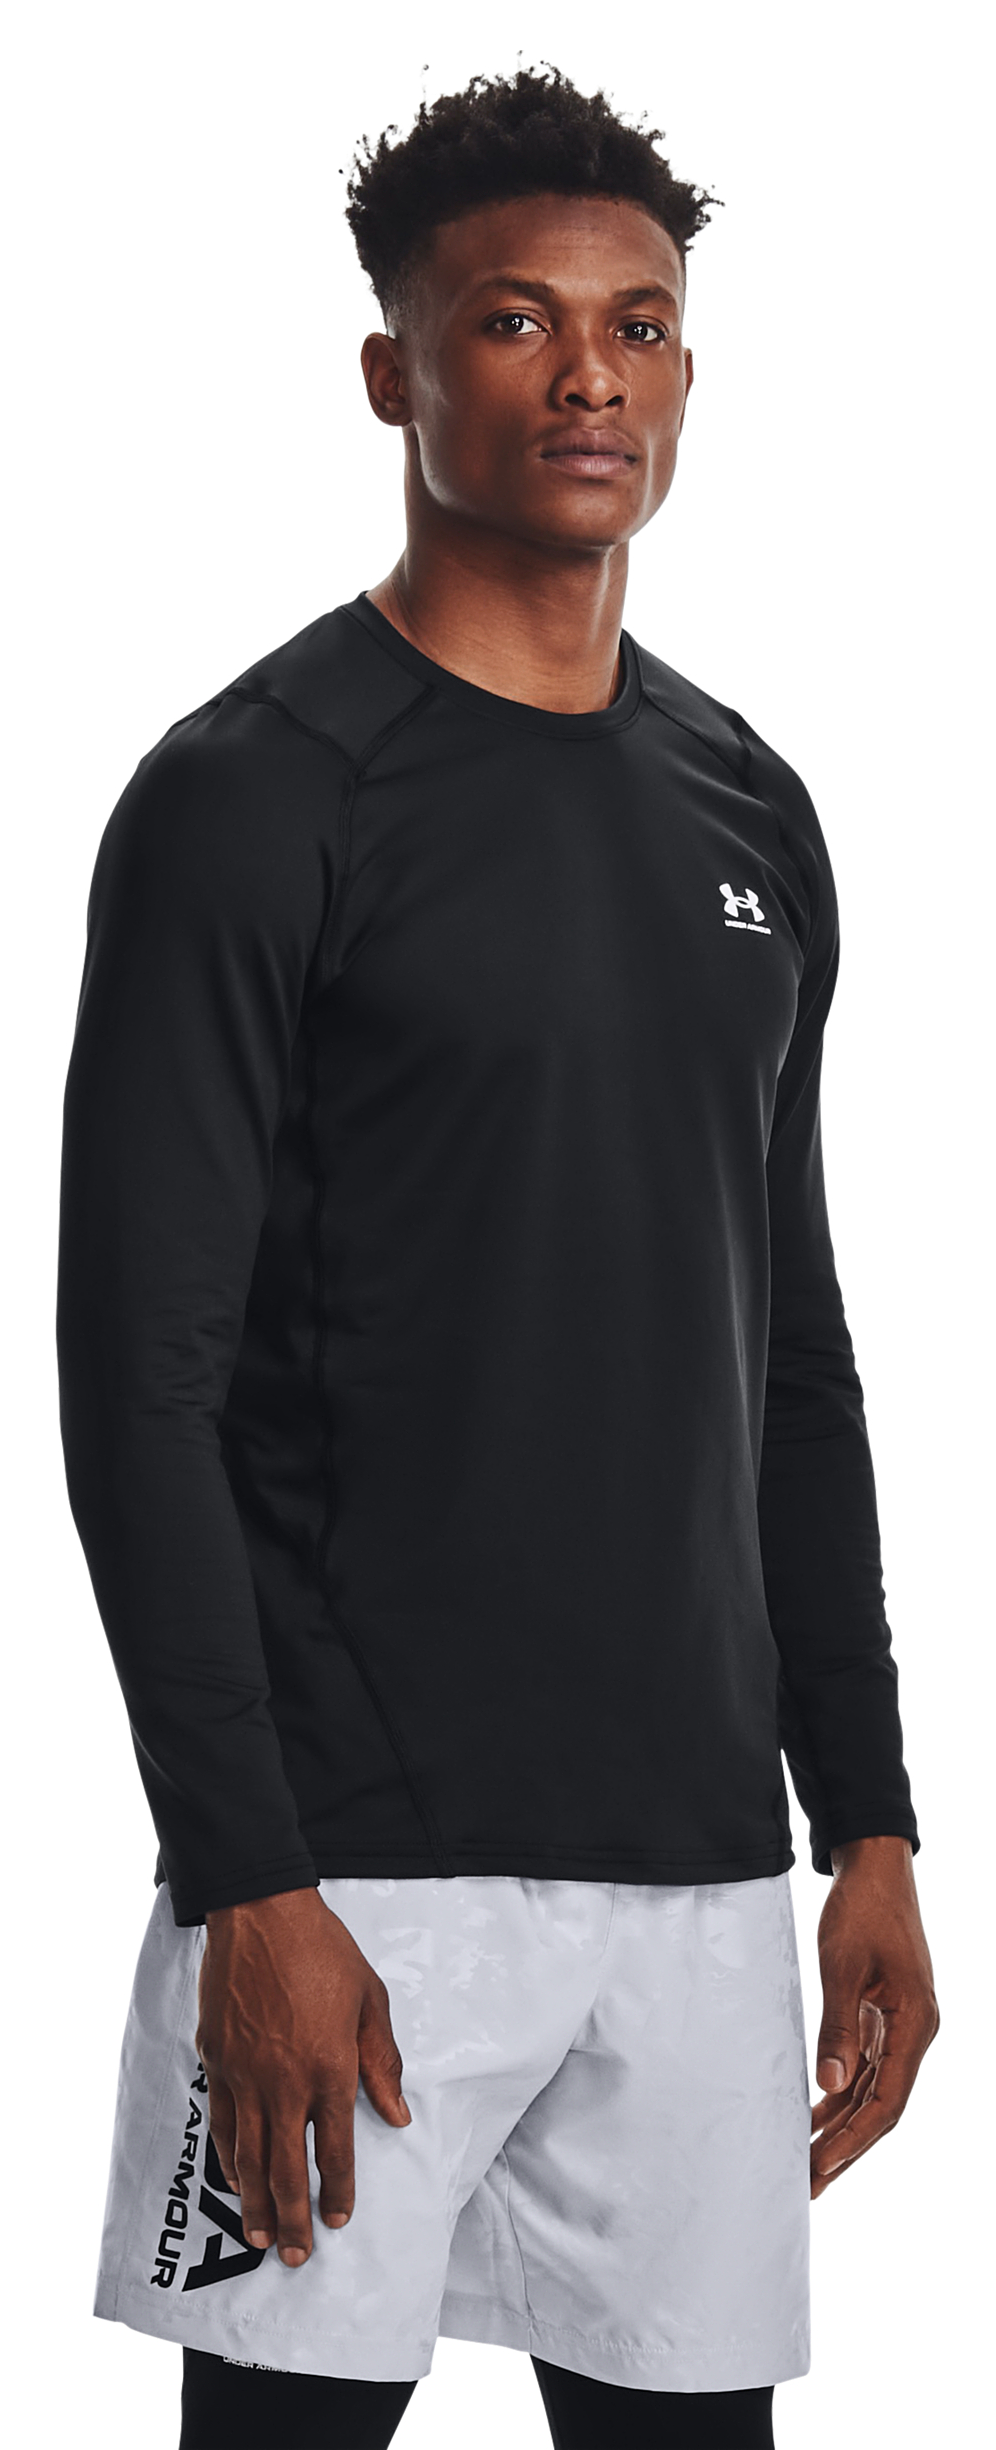 Under Armour ColdGear Fitted Long-Sleeve Crew for Men - Black/White - 2XLT